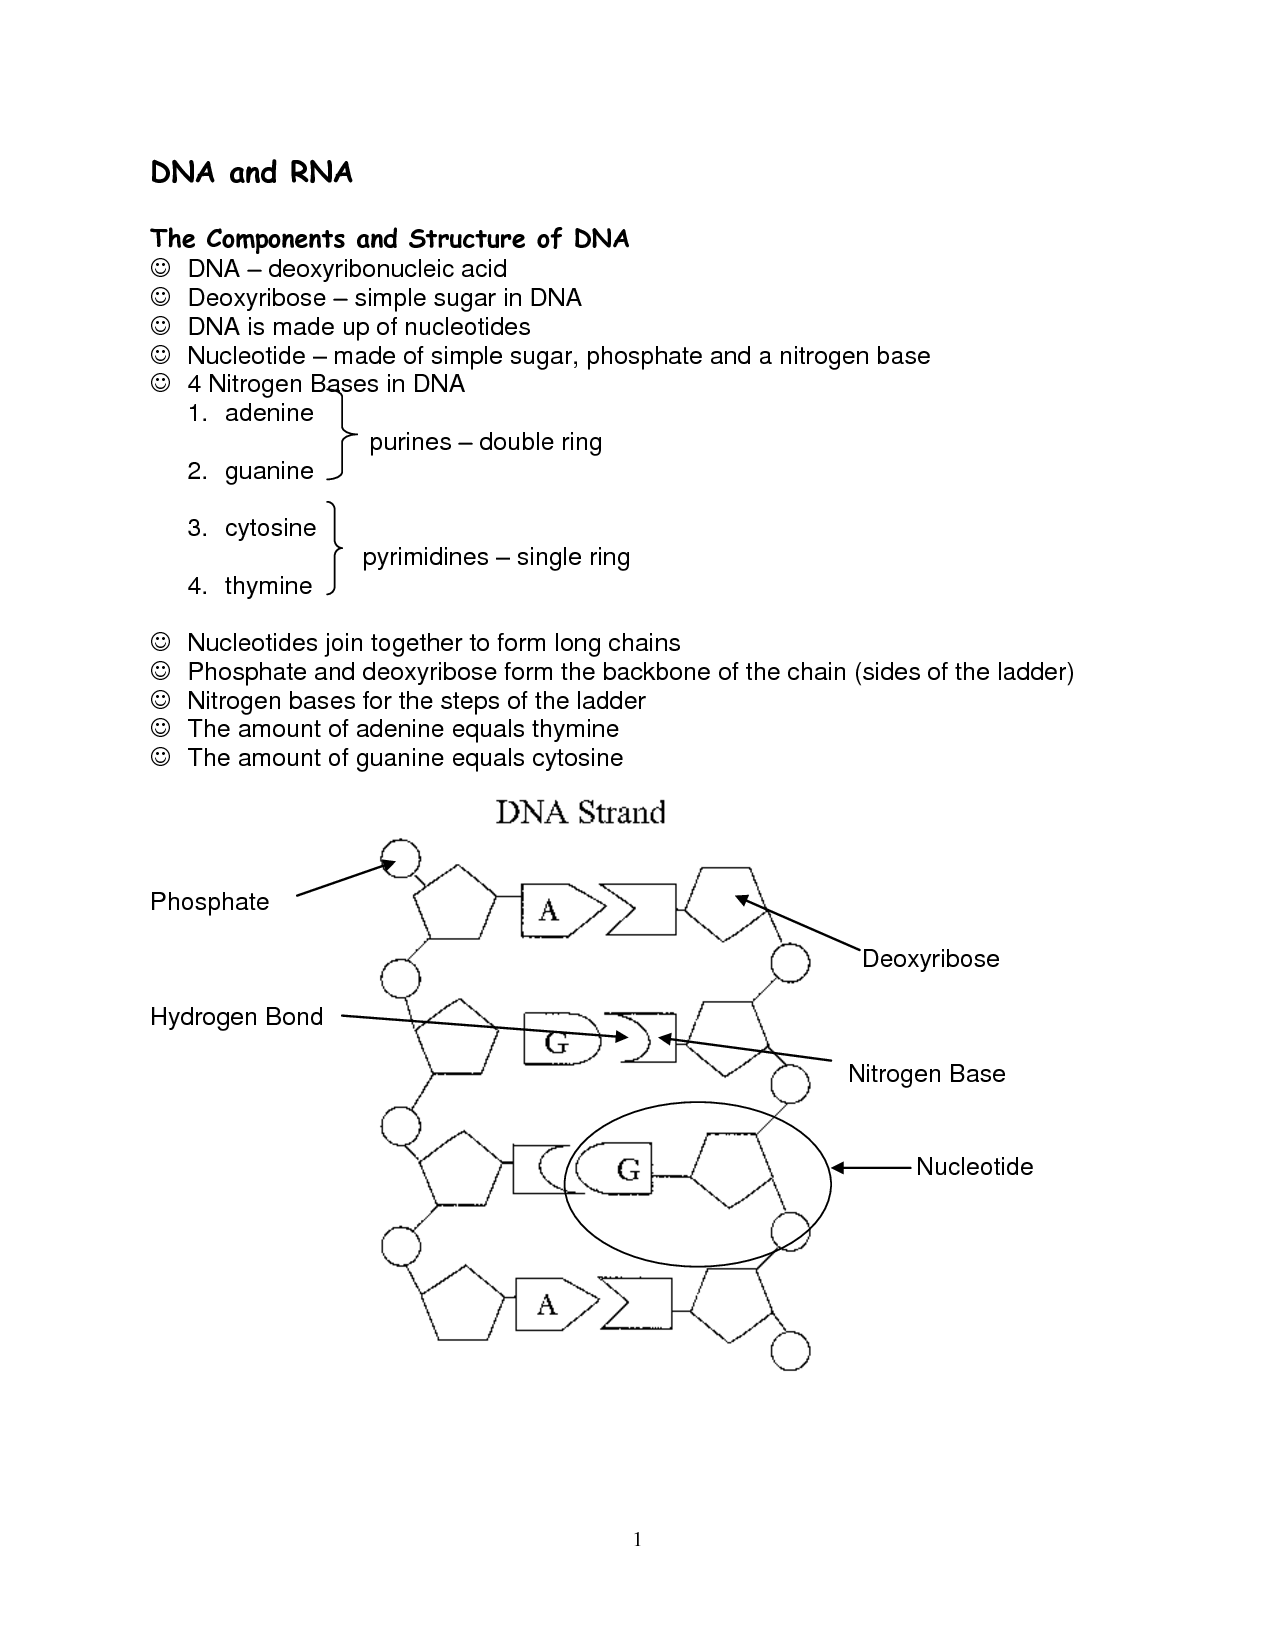 DNA and RNA Structure Worksheet Image